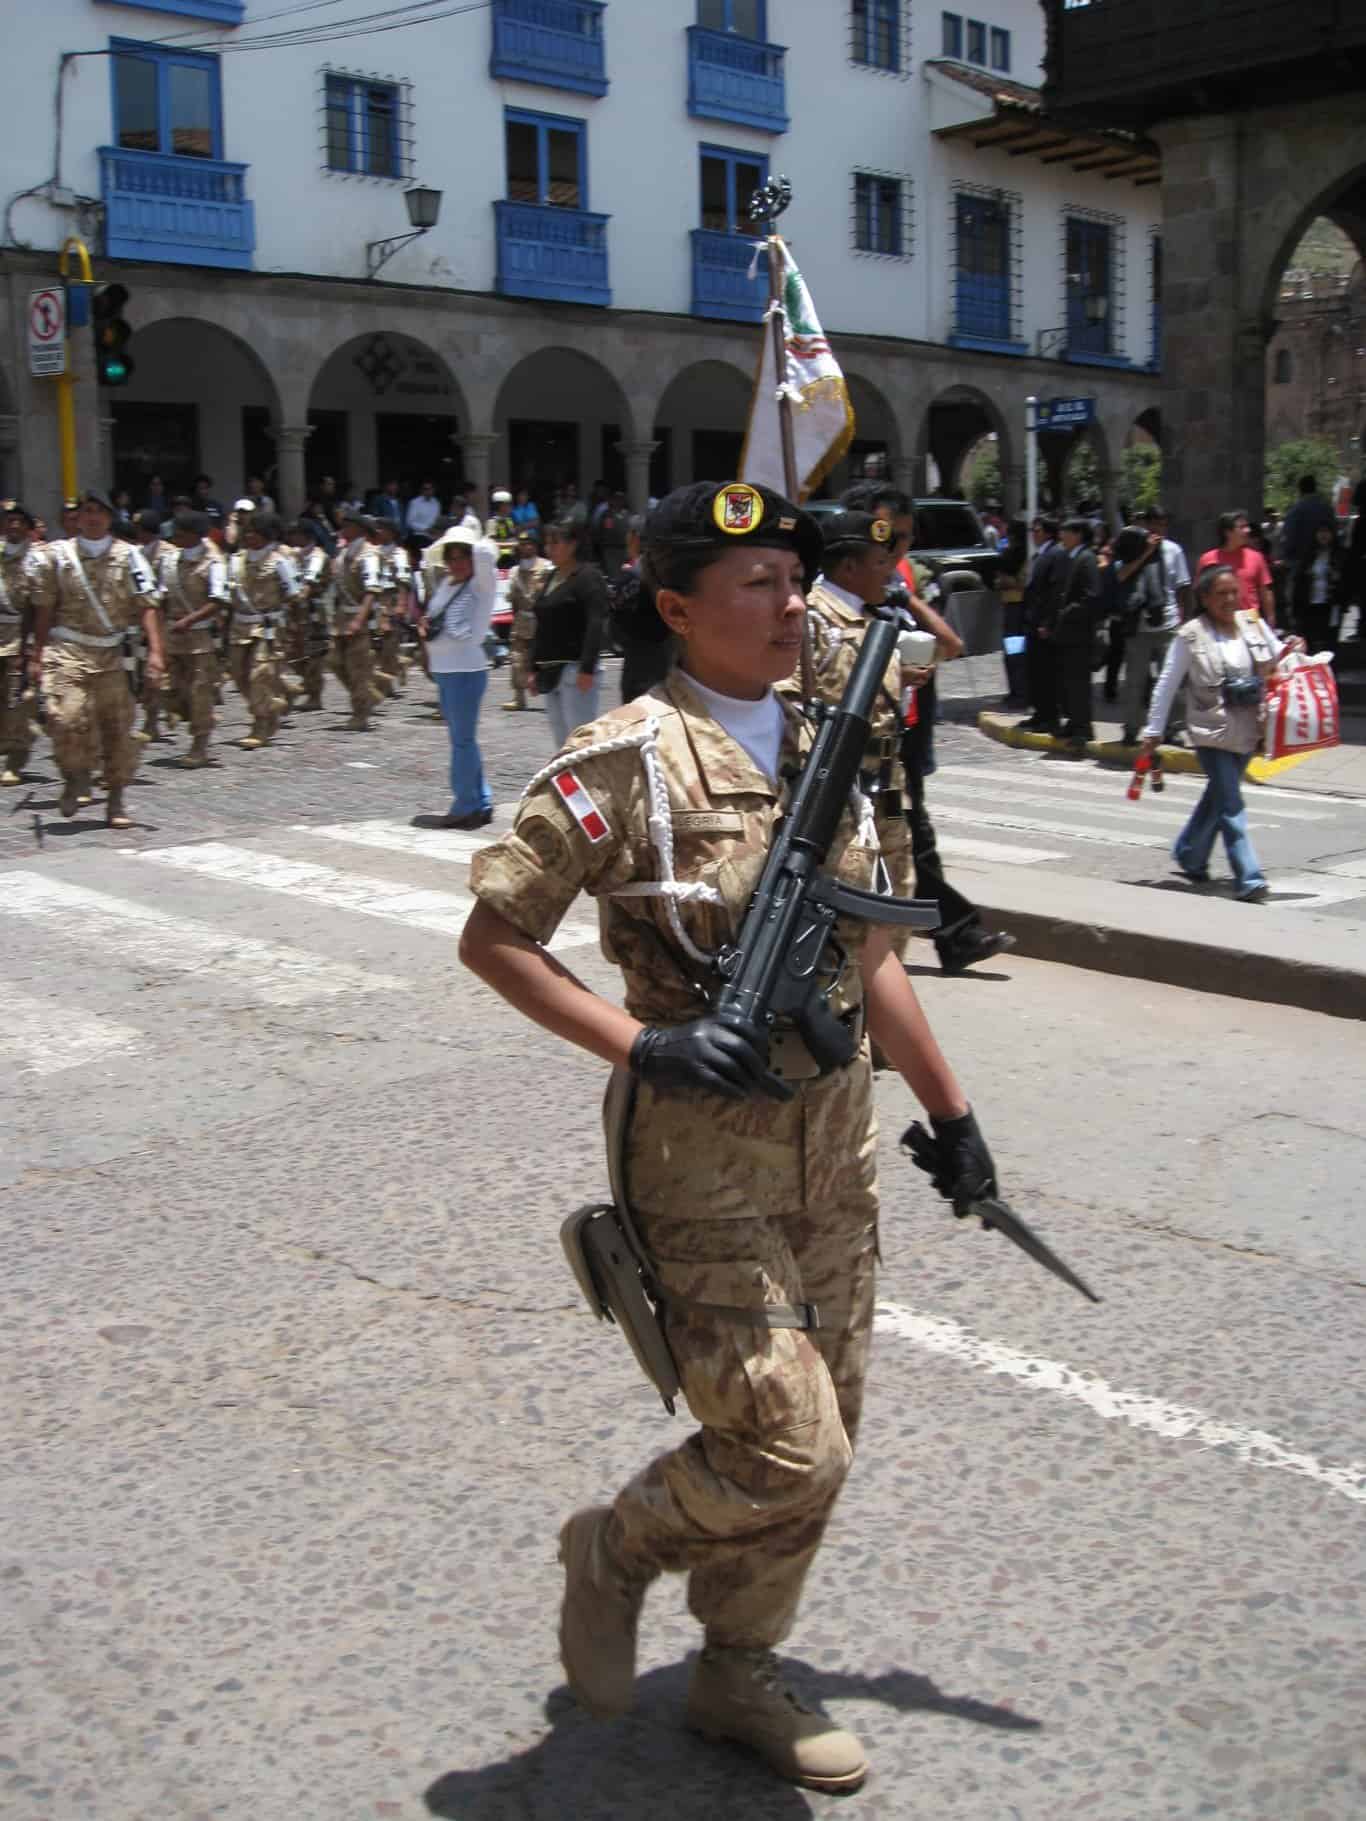 Military parade in Cusco by Chris Feser